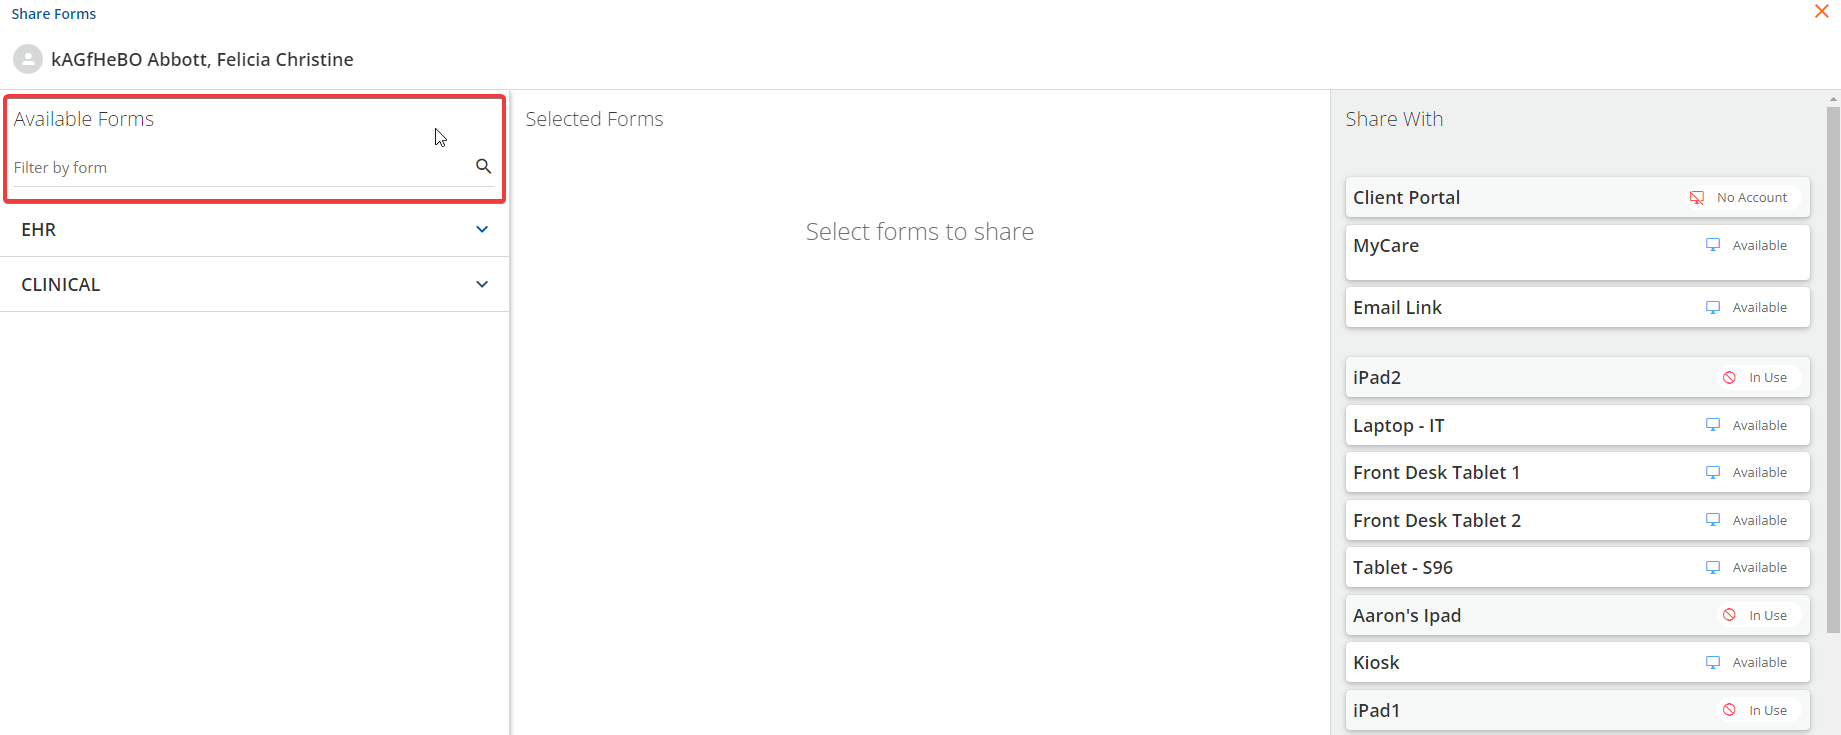 Client - Share Forms Filter Search